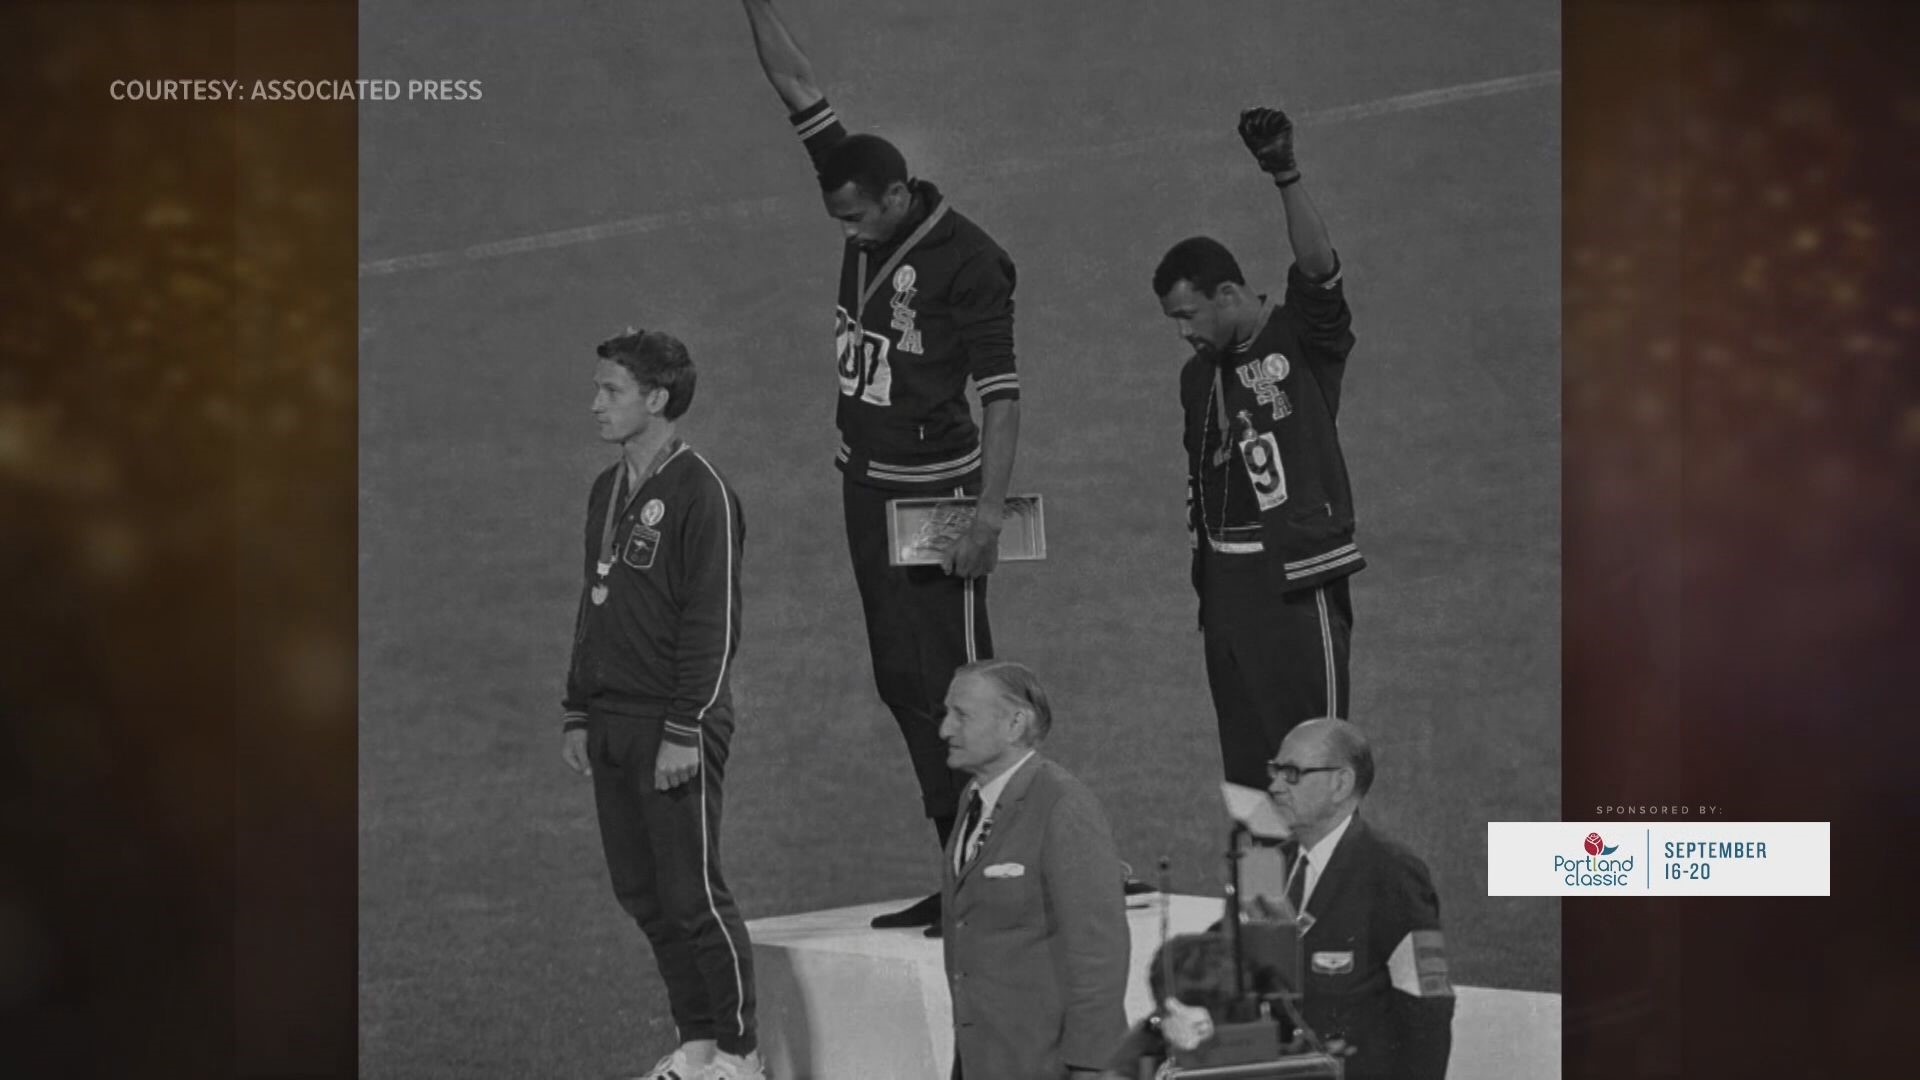 Tommie Smith and John Carlos used their platform to shine a spotlight on civil rights issues in 1968.